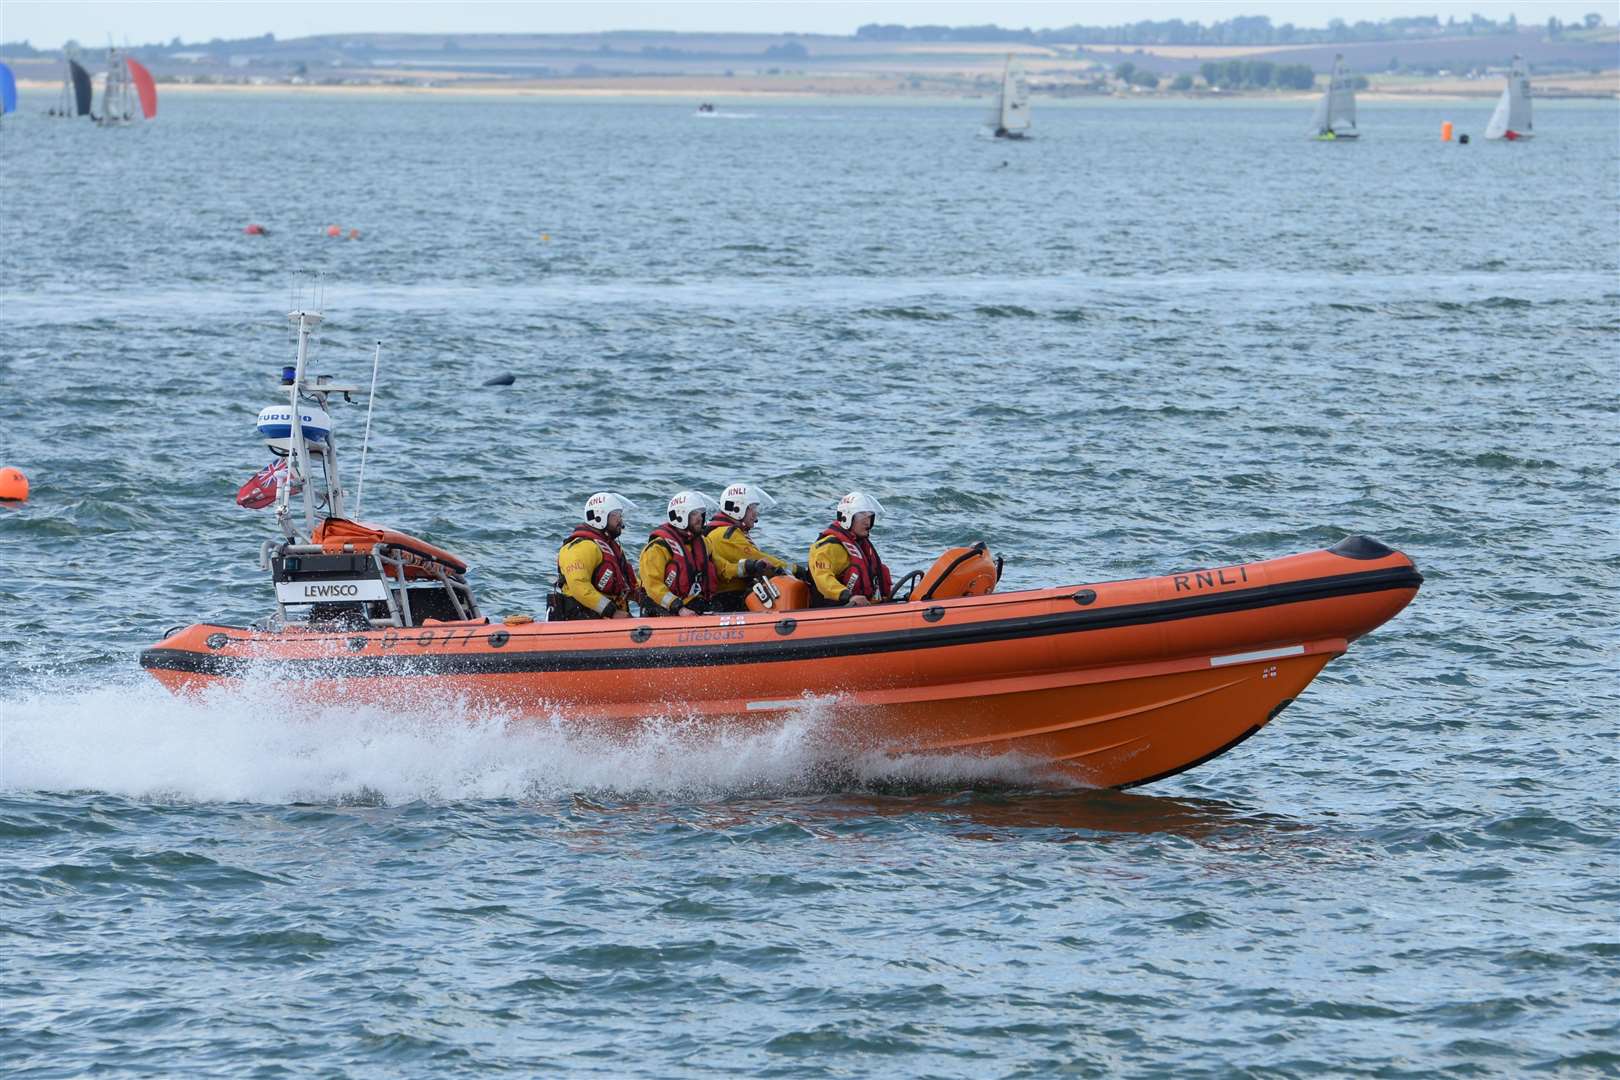 Lewisco, the Whitstable Atlantic 85 Lifeboat. Picture: RNLI Whitstable